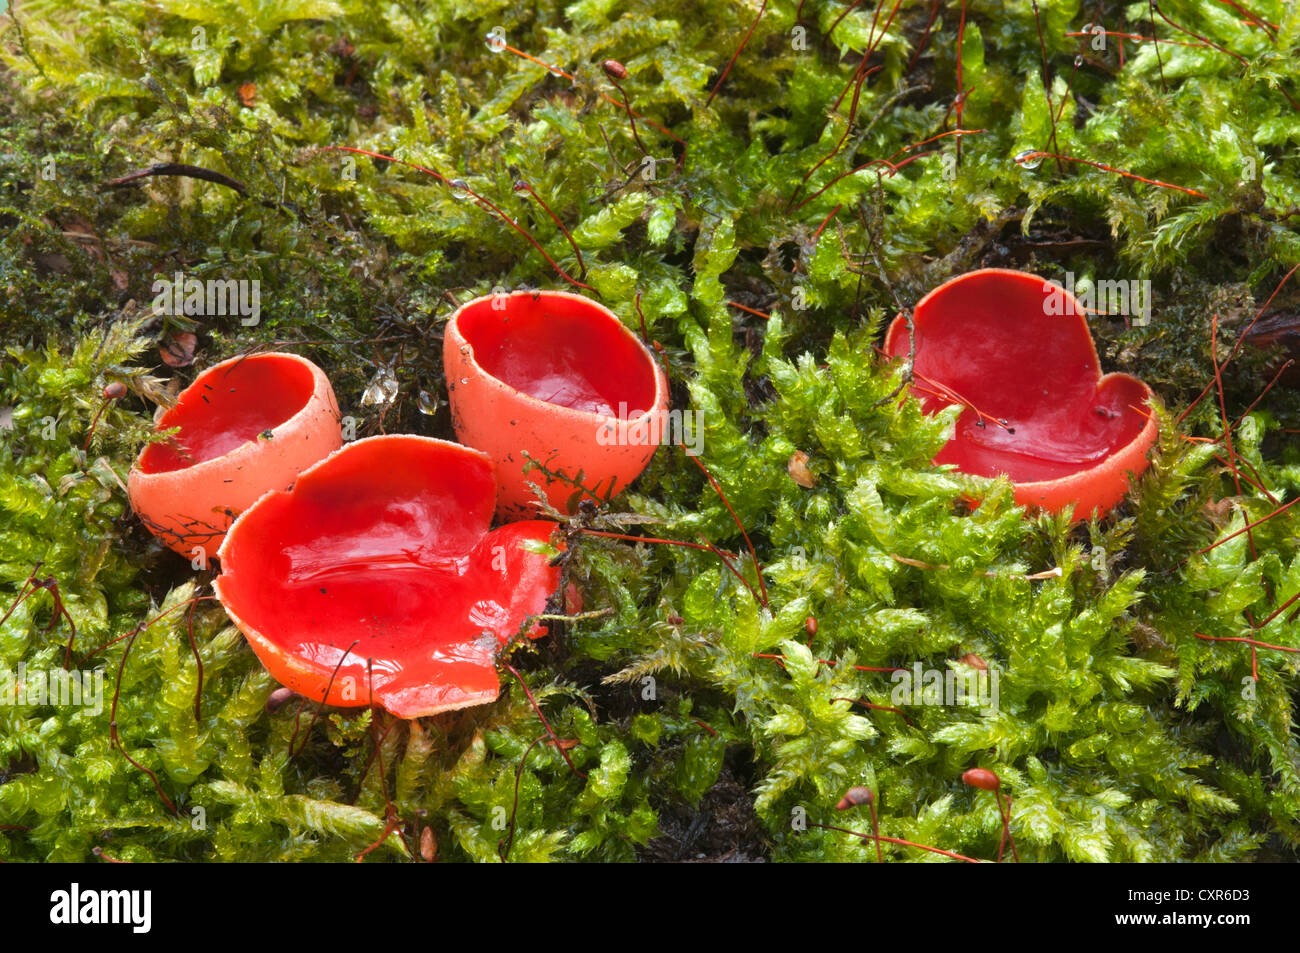 Scarlet Elf Cup or Scarlet Cup (Sarcoscypha coccinea), Tratzberg Conservation Area, Stans, Tyrol, Austria, Europe Stock Photo